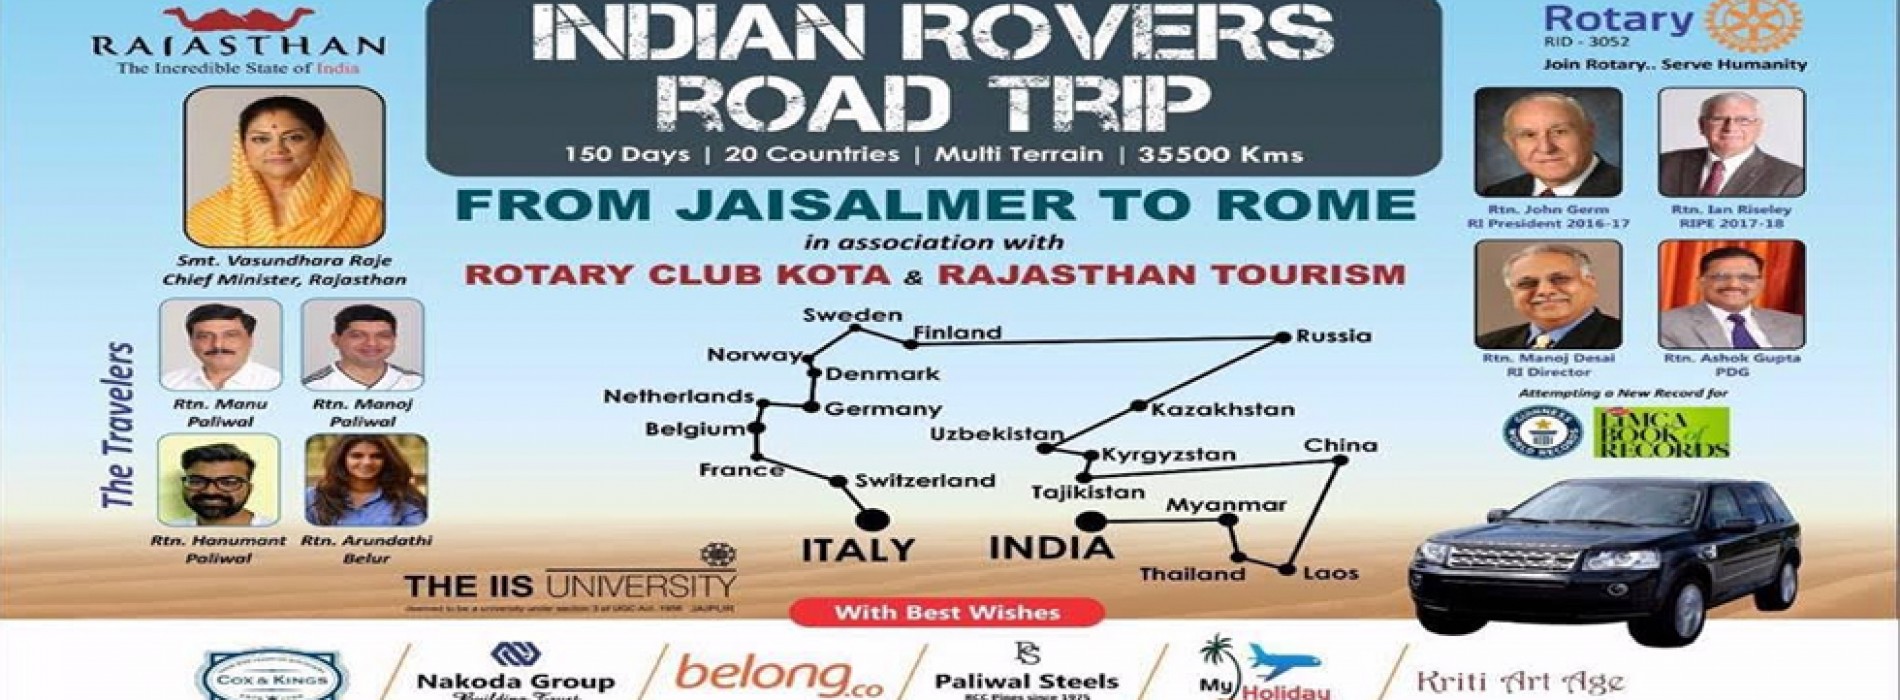 Come be a part of the multi terrain adventure with the Indian Rovers- A 33500 KM road trip of 150 days from India to Italy